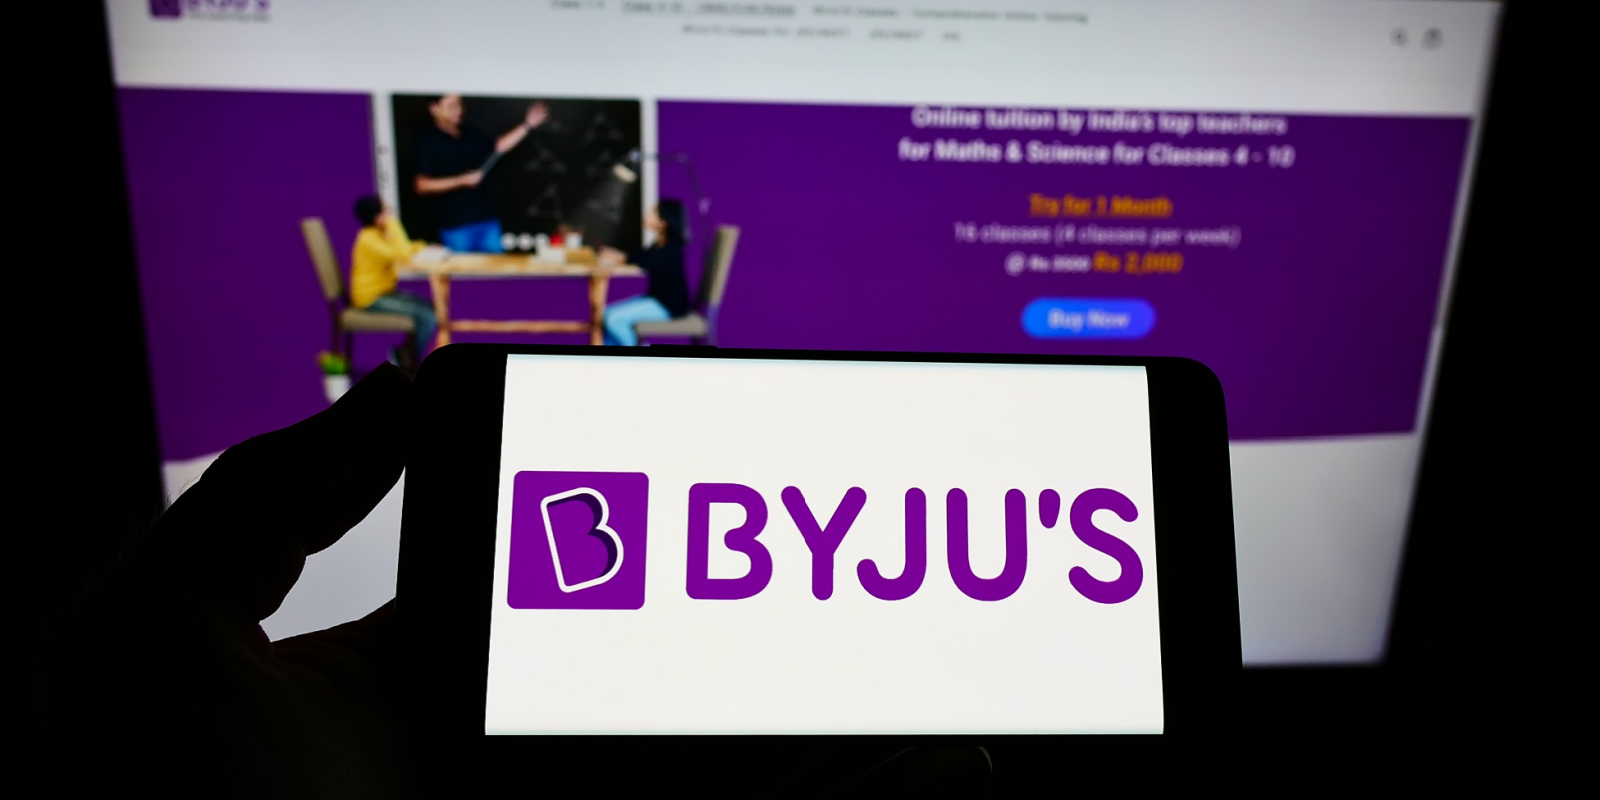 All that has gone wrong at BYJU’S